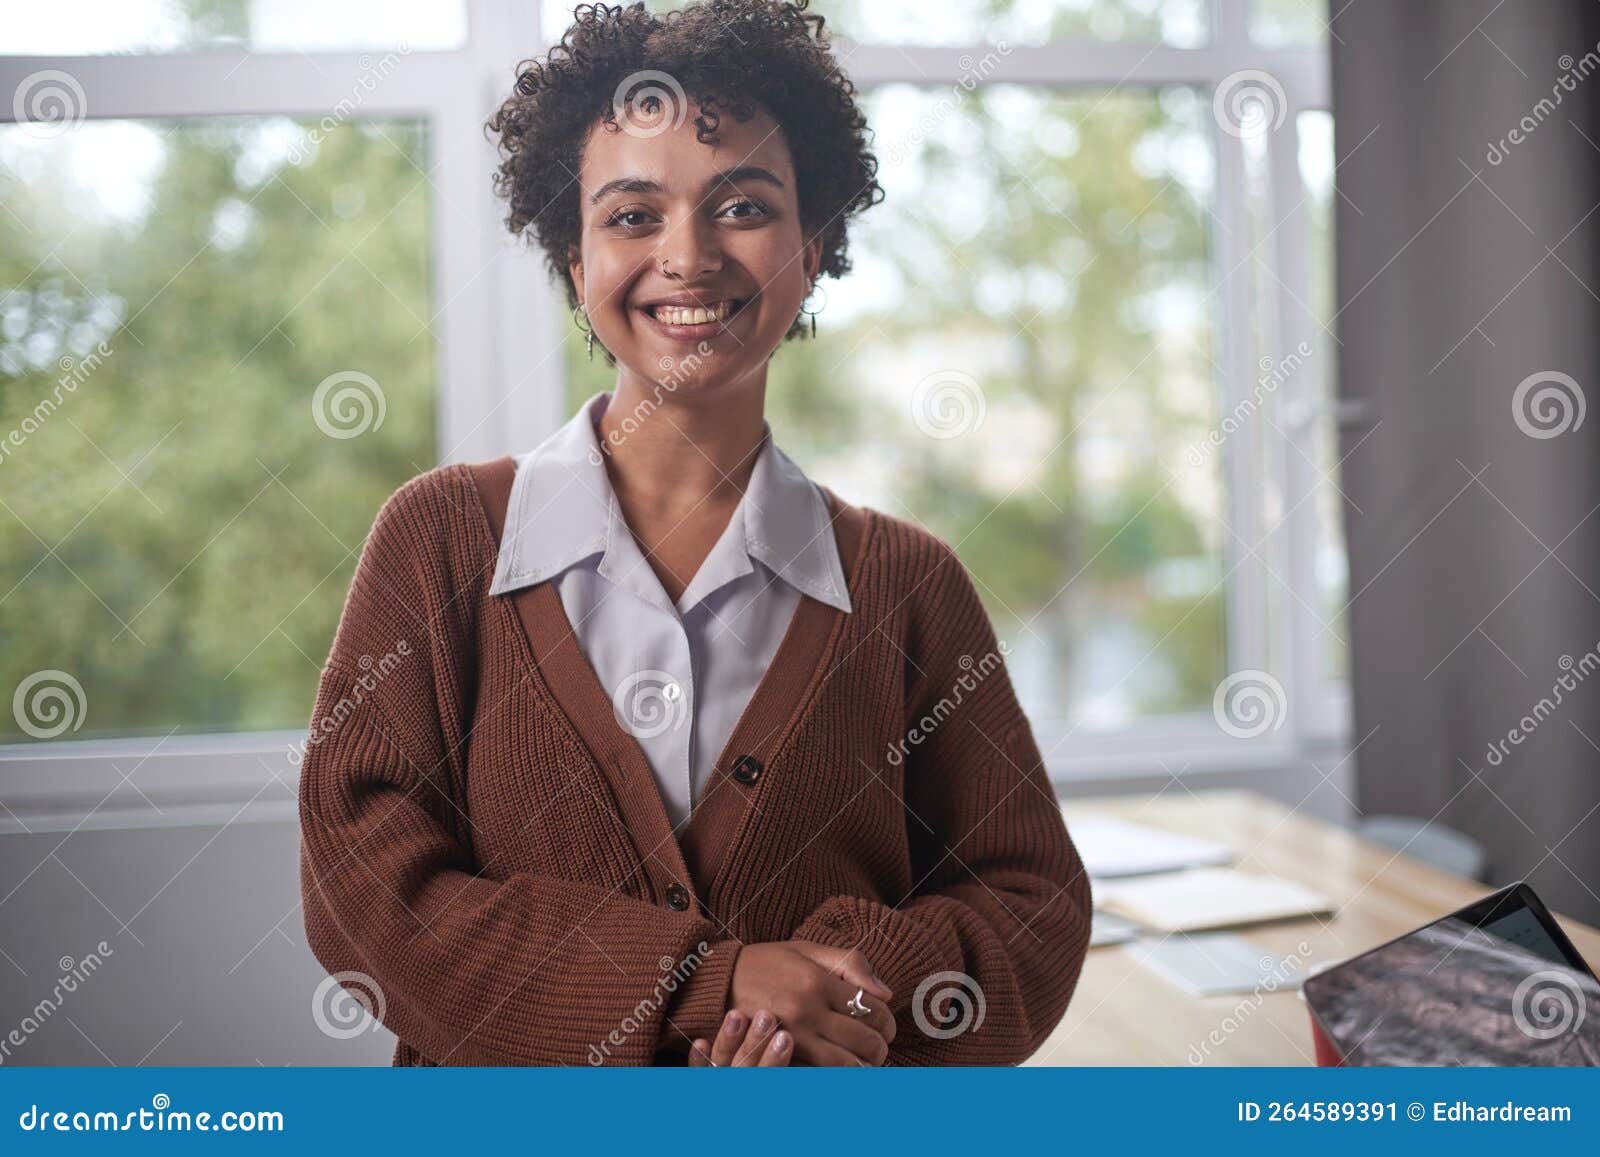 front portrait of pretty young woman in office